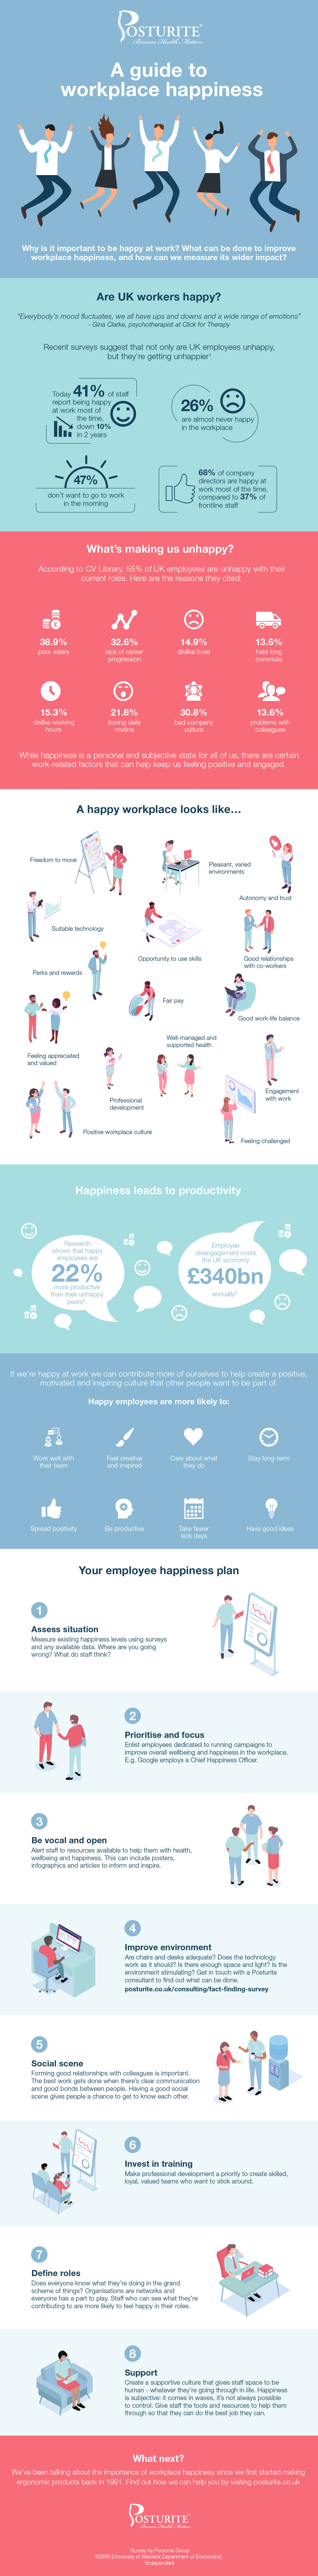 Click here to download our 'A guide to workplace happiness' infographic